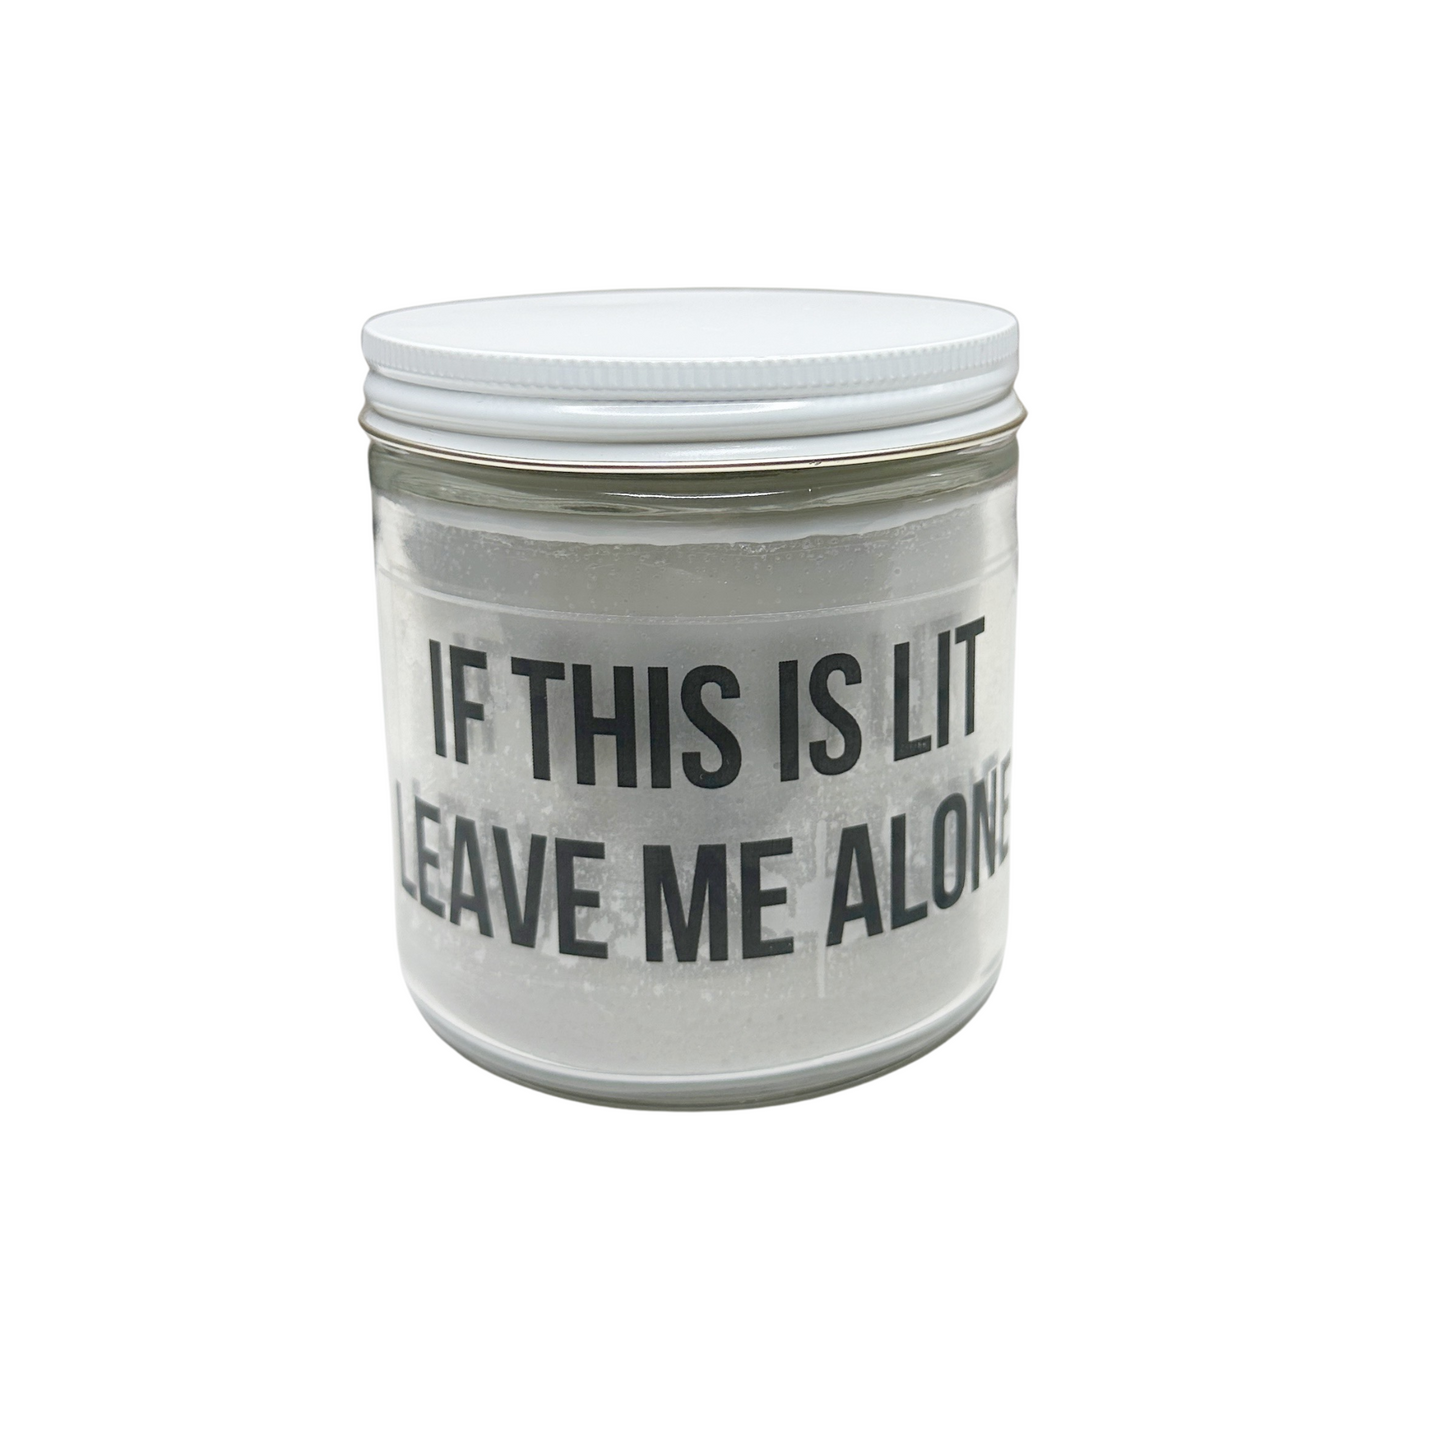 If This is Lit Leave Me Alone - Recycled Candle